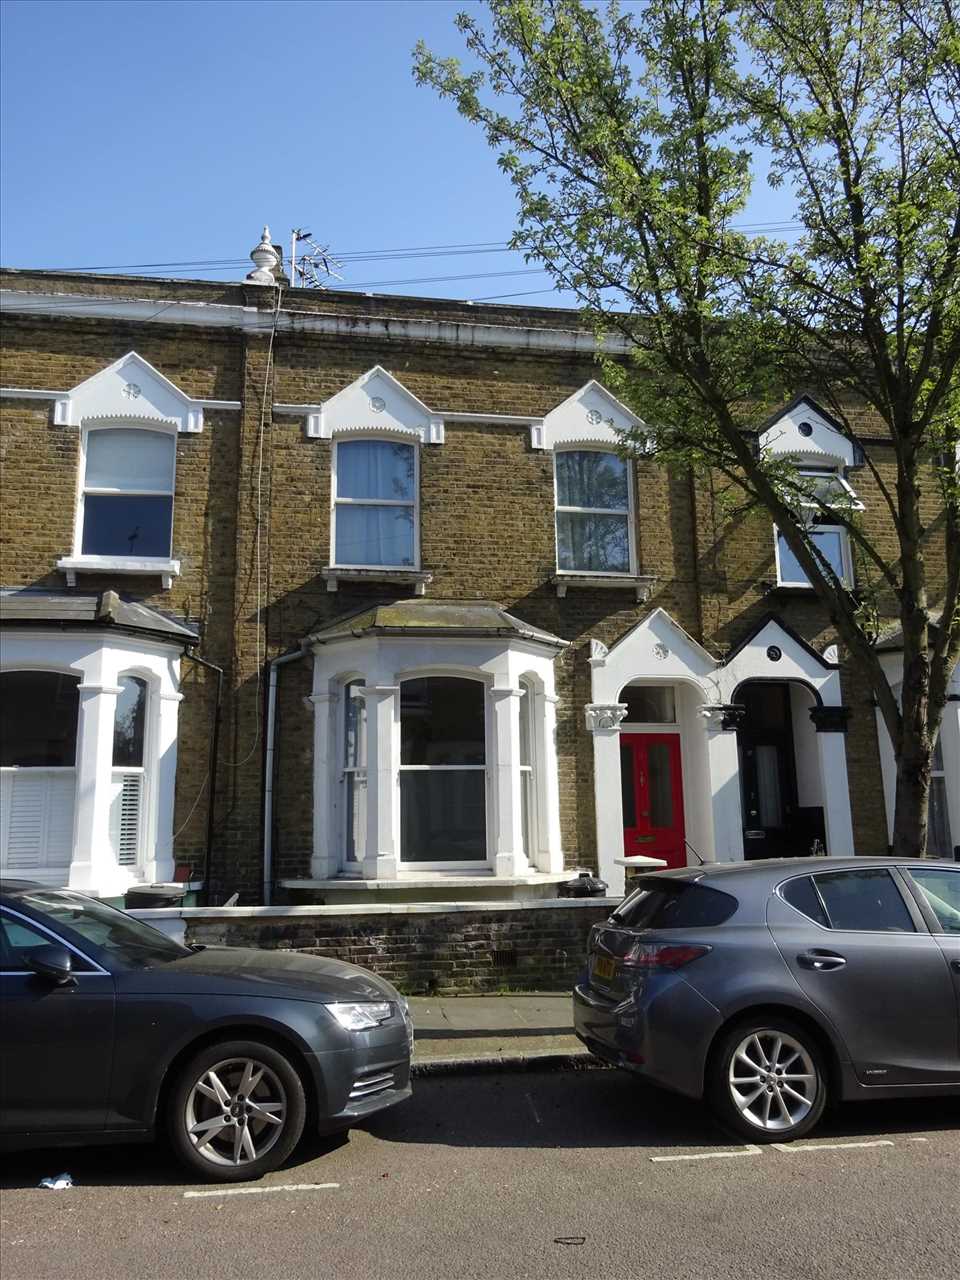 AVAILABLE FROM 26TH JUNE 2023 WITH HOUSE OF MULTIPLE OCCUPATION LICENCE.  A well presented two storey terraced Victorian house situated in a sought after location within close proximity to Archway (Northern Line) underground station, Upper Holloway overground station, Whittington Park, local ...